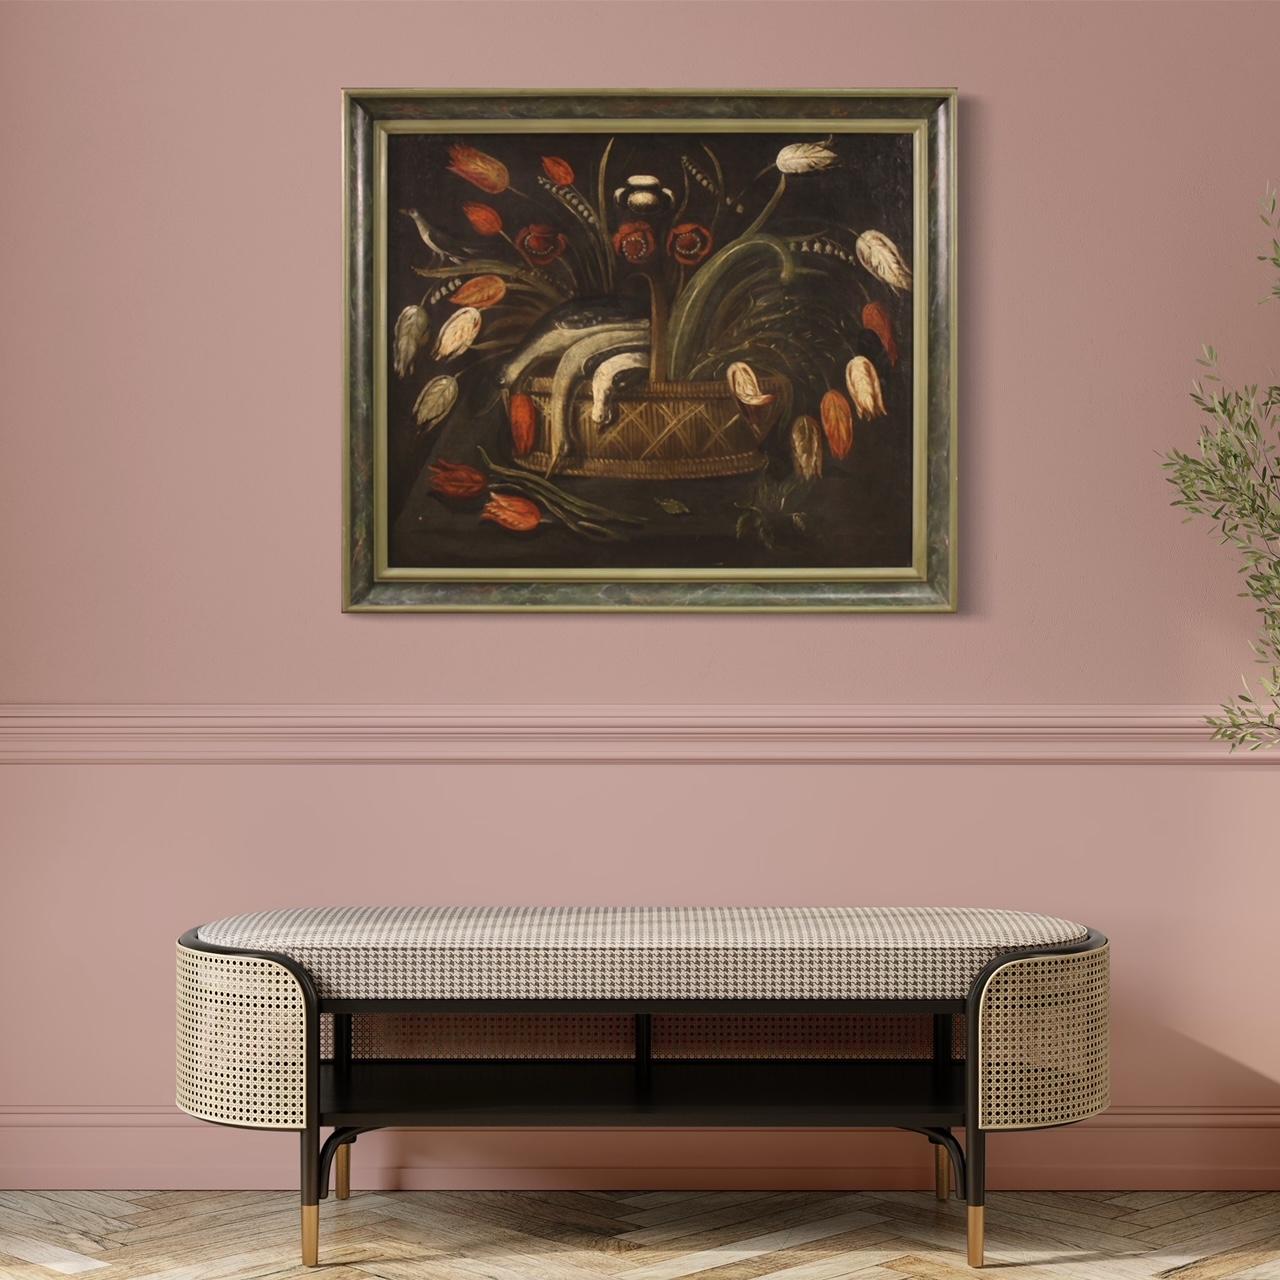 Ancient Italian painting from the 18th century. Oil on canvas framework depicting still life, large basket with flowers and game, of good pictorial quality. Painting adorned with a modern, carved and lacquered wooden frame, of beautiful decoration.